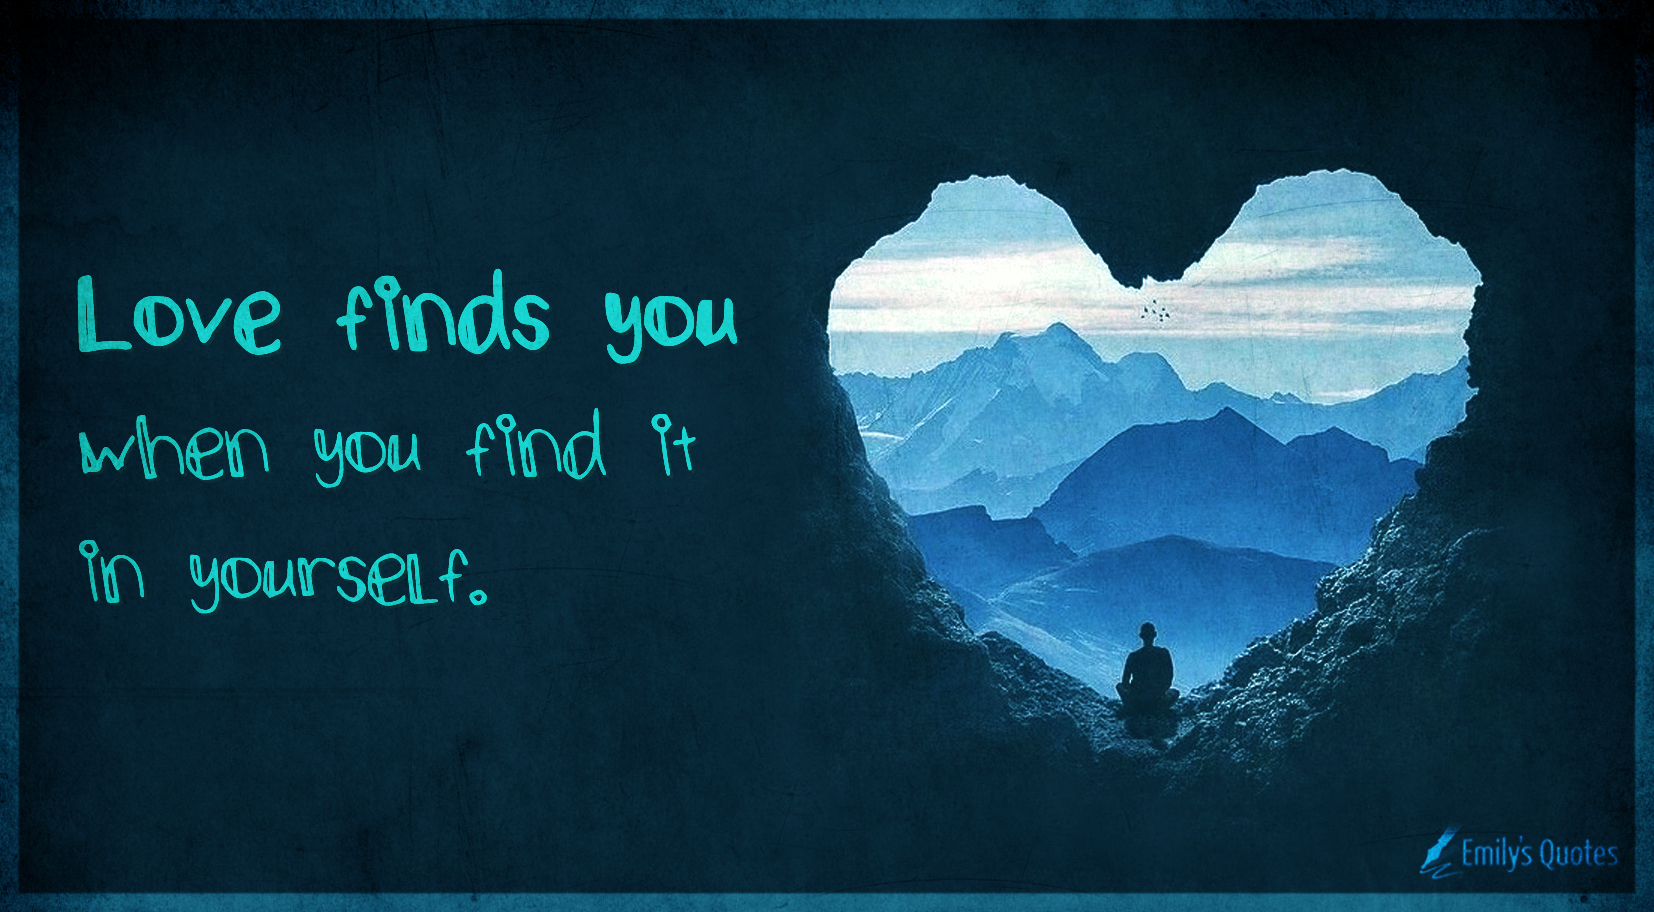 Love finds you when you find it in yourself